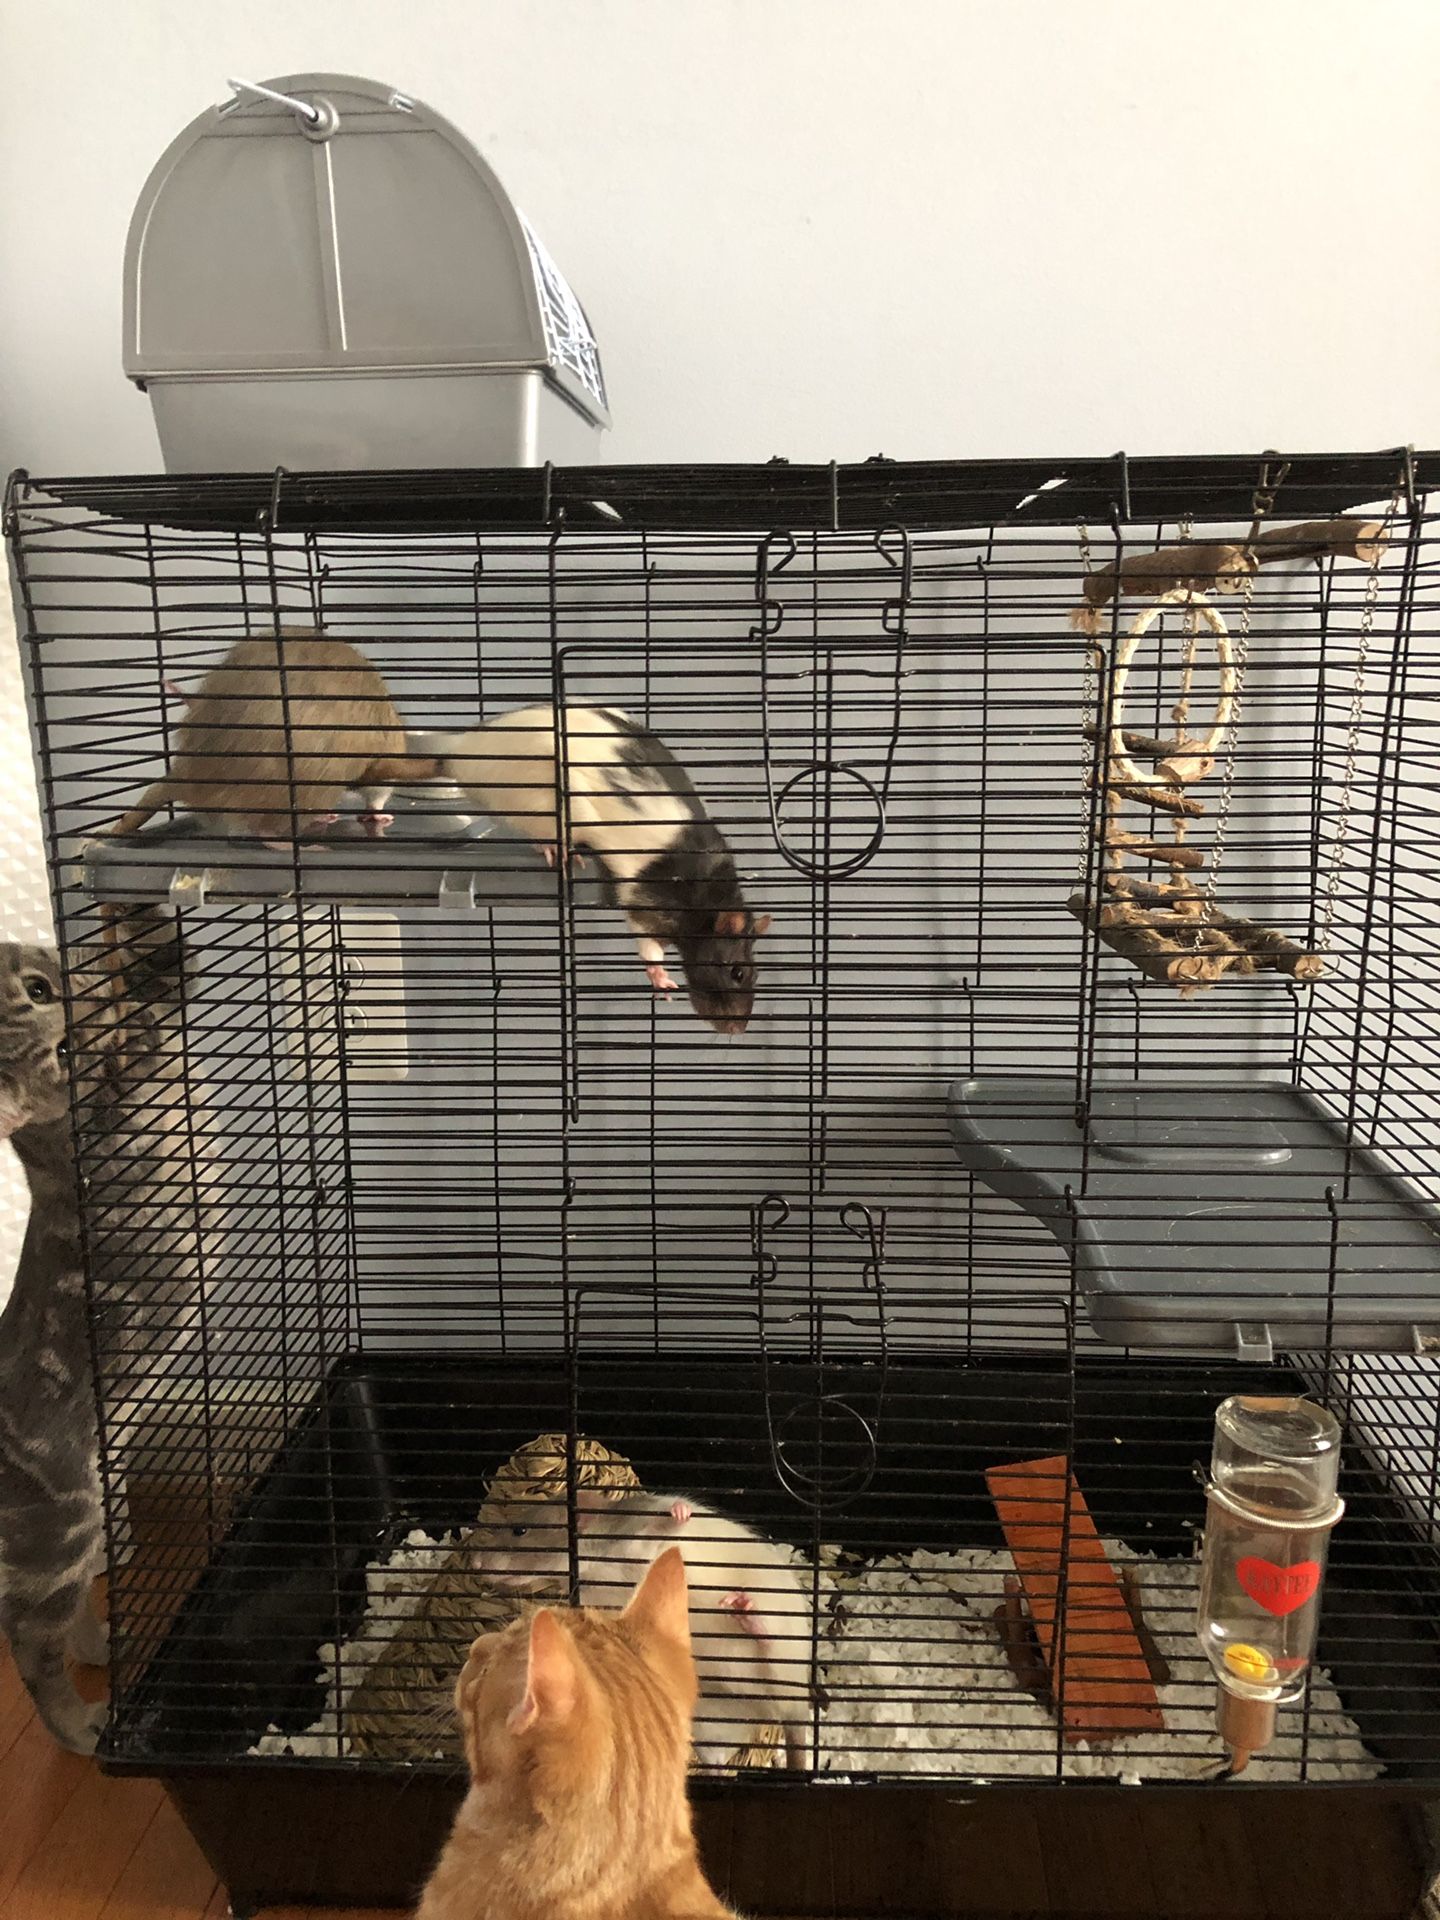 Rats, cage, supplies